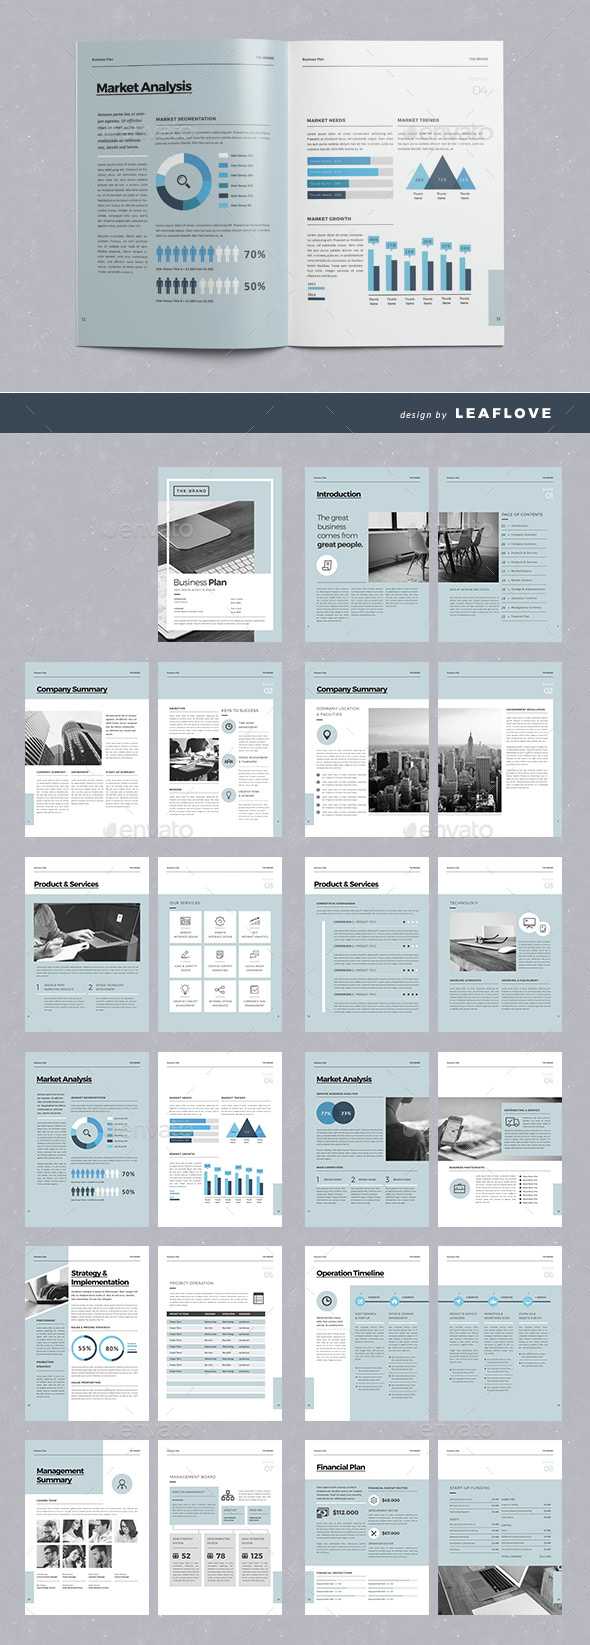 Business Plans Ign Plan Template Free Adobe Annual Report For Free Indesign Report Templates